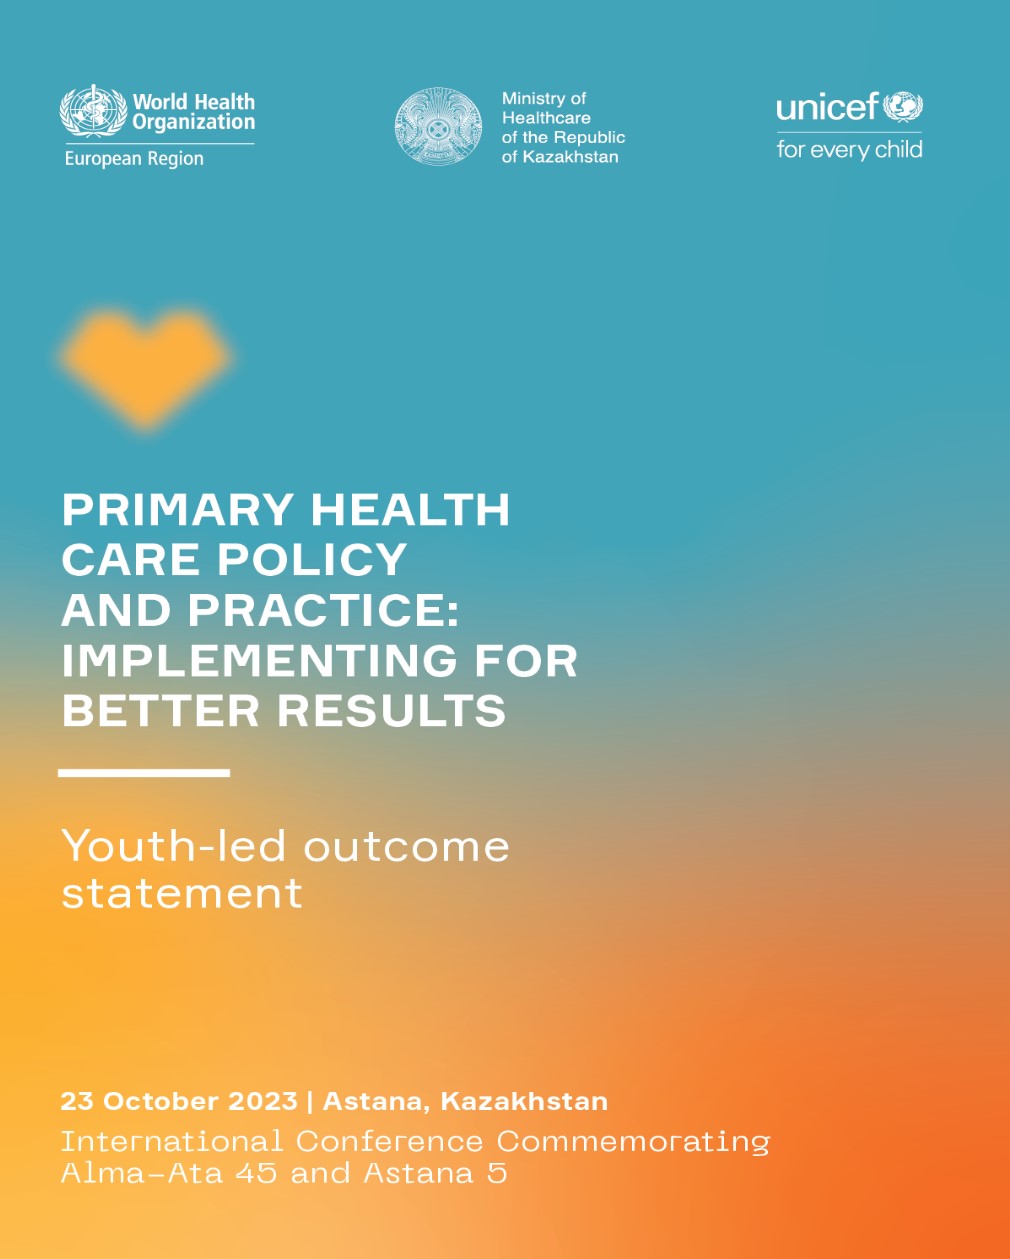  Primary health care policy and practice: implementing for better results - Youth-led outcome statement